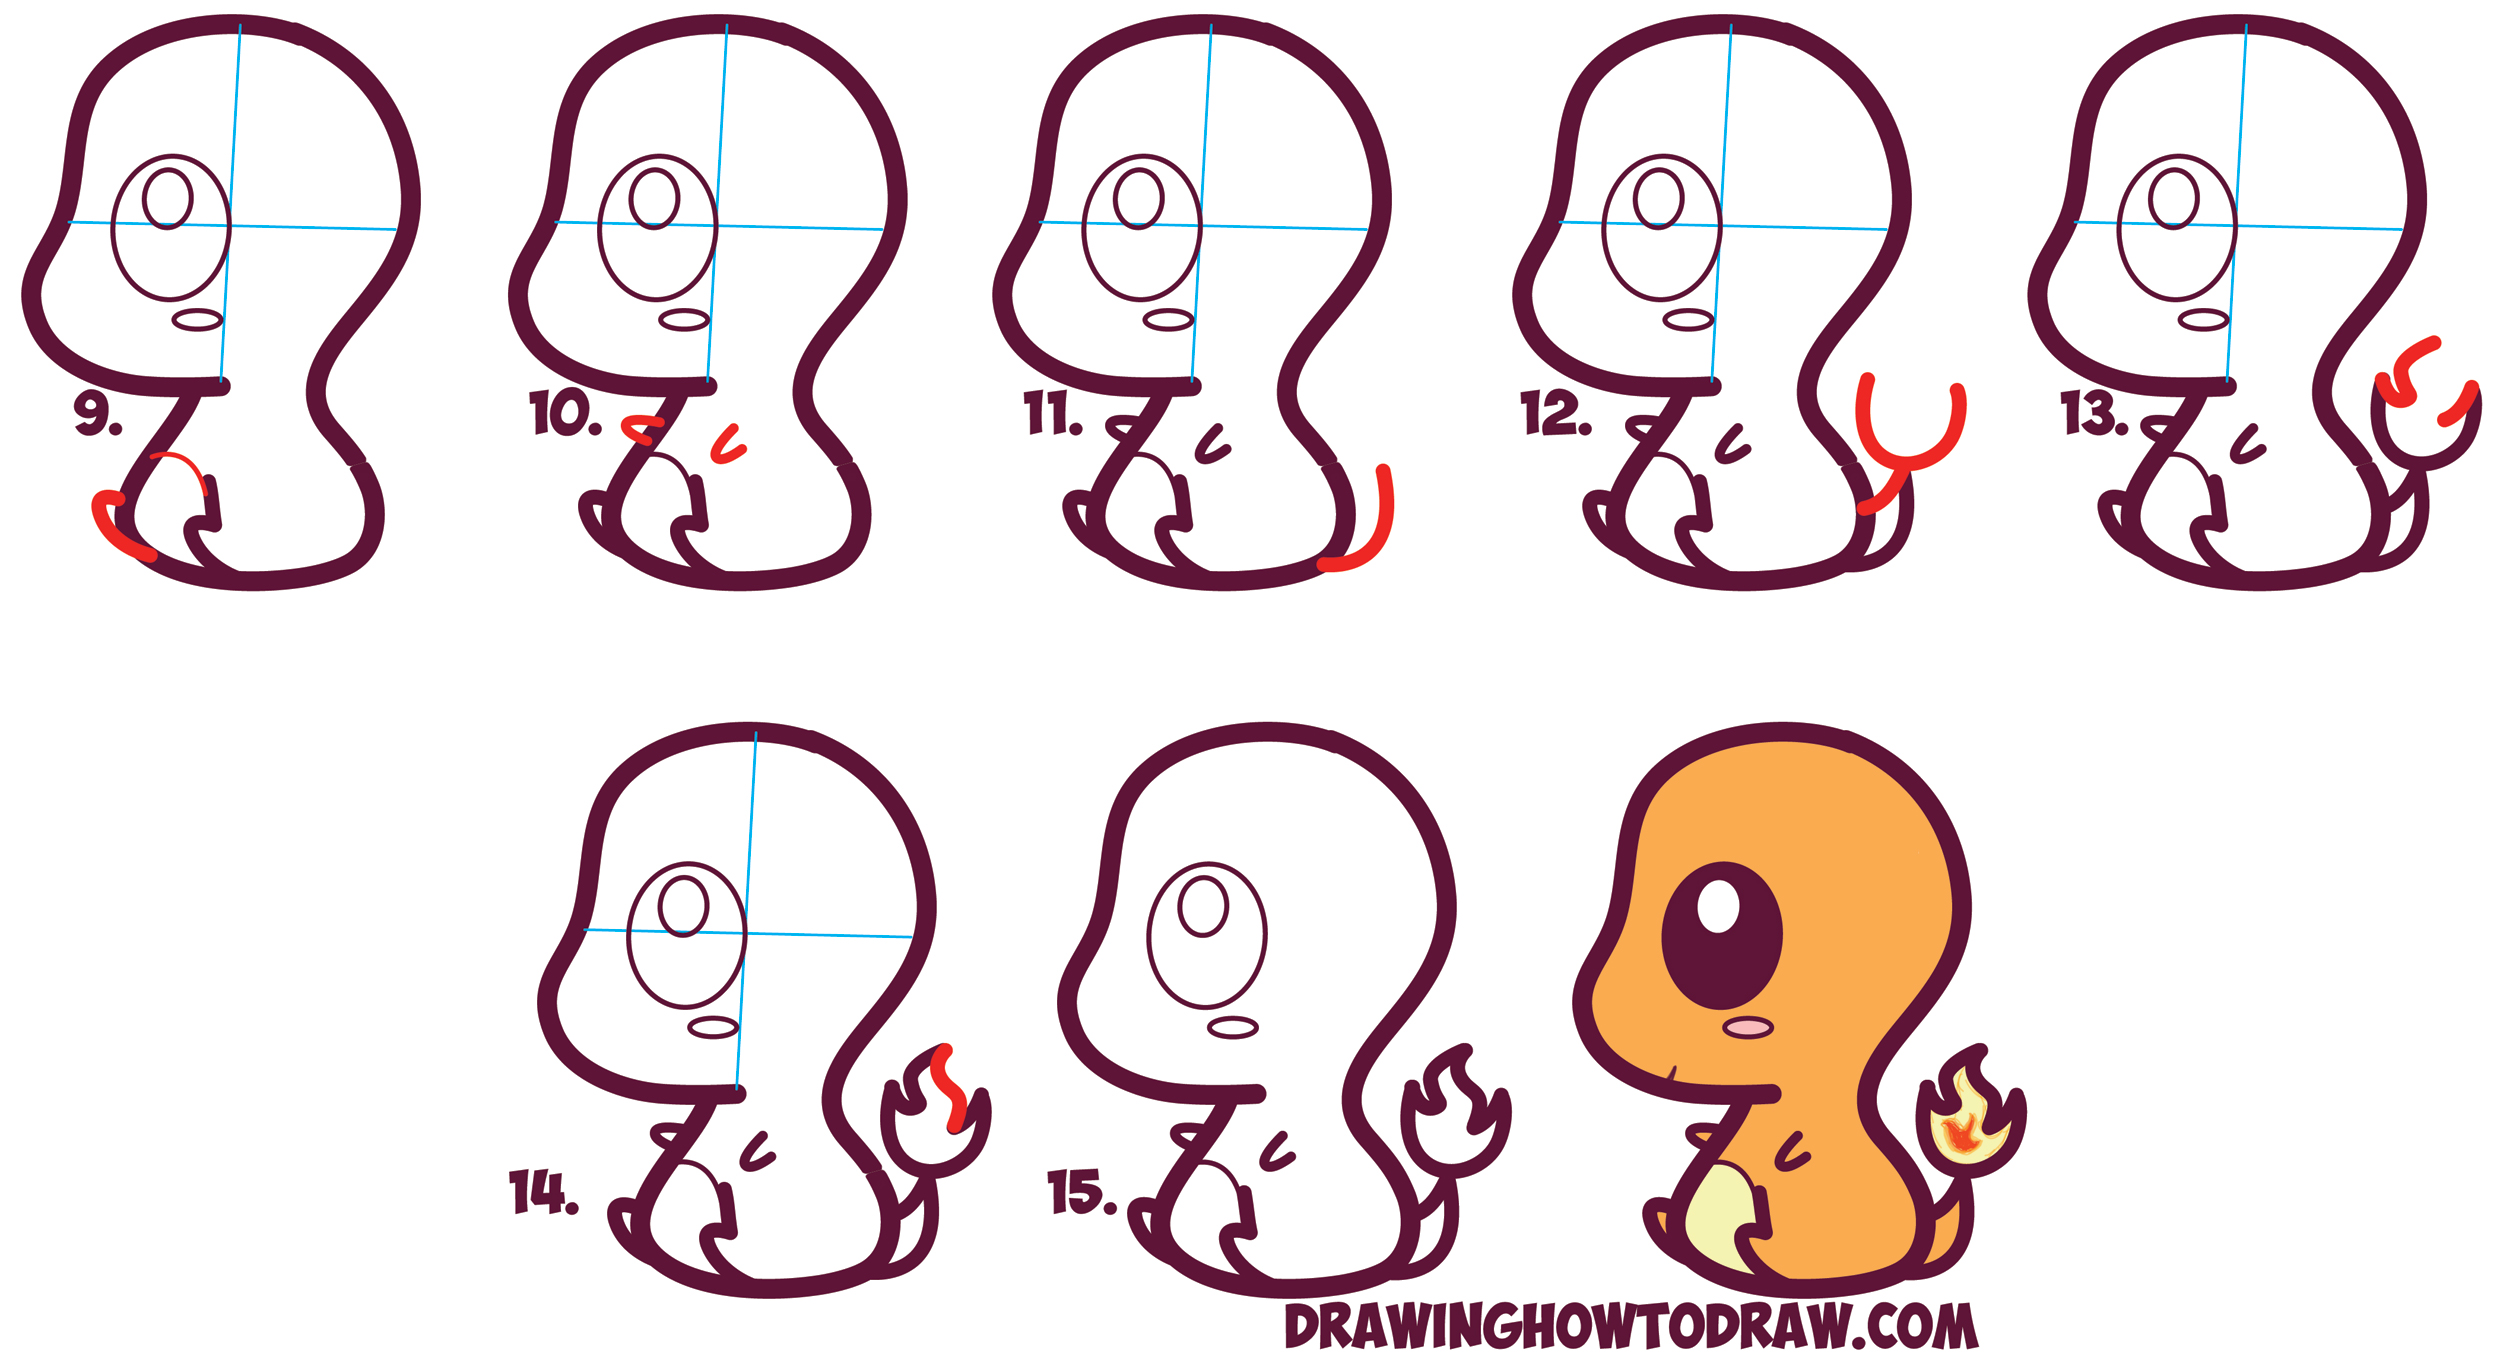 Learn How to Draw Cute / Kawaii / Chibi Charmander from Pokemon in Simple Steps Drawing Lesson for Kids and Beginners